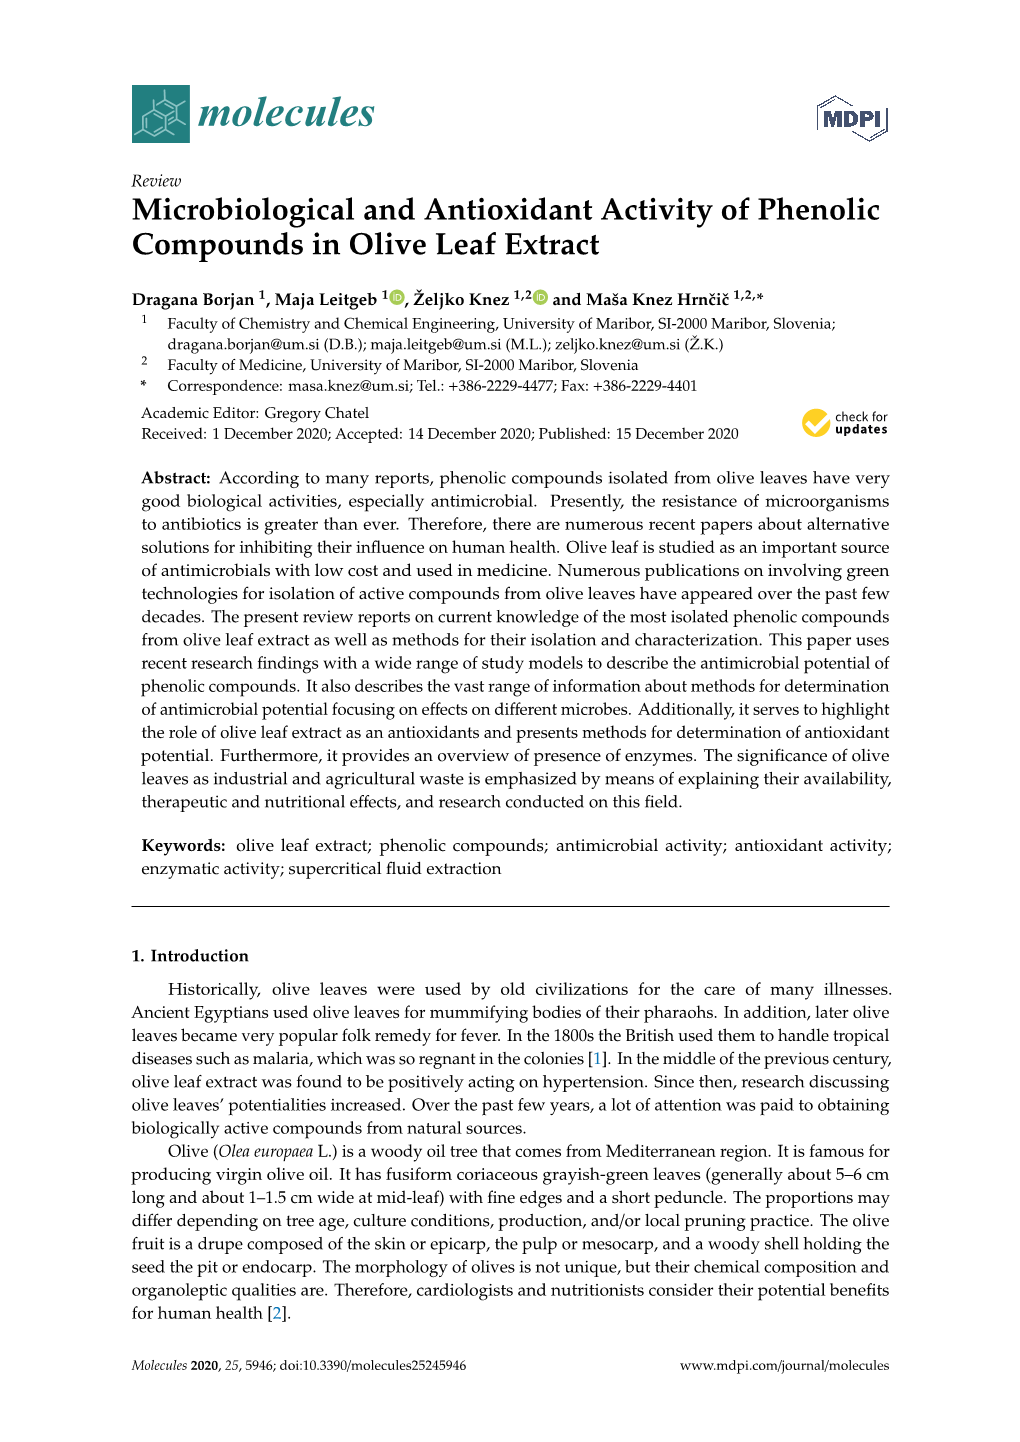 Microbiological and Antioxidant Activity of Phenolic Compounds in Olive Leaf Extract